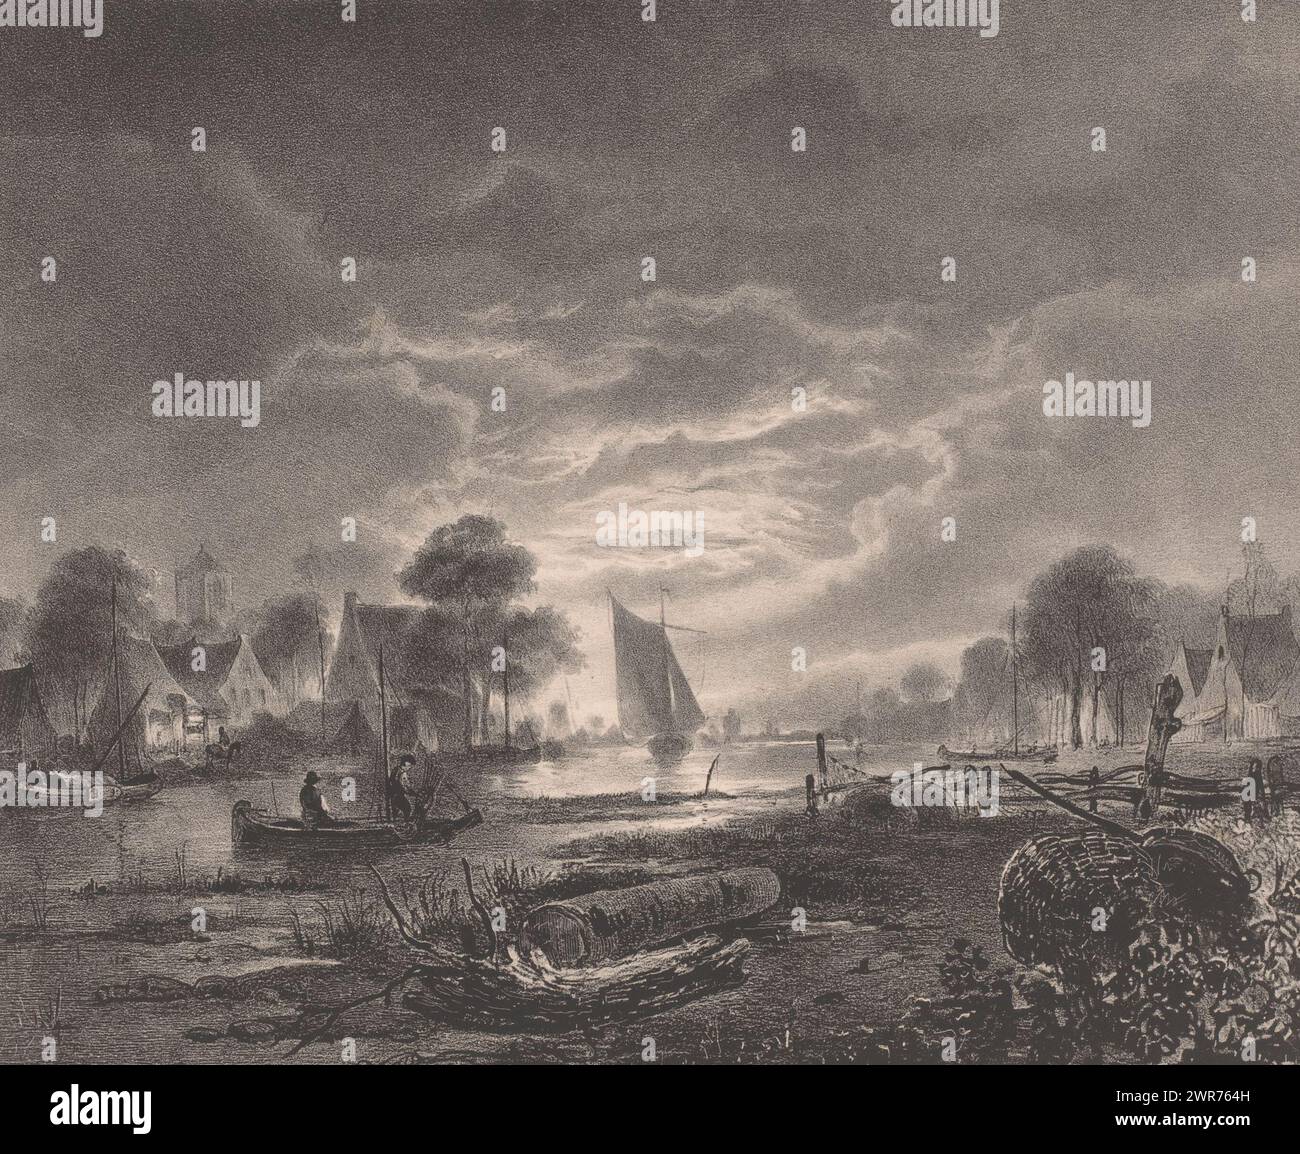 River landscape in moonlight, A moonshine (title on object), Three sailing boats on the water, one with hoisted sails. The moon shines through the clouds. Numbered top left: Pantheon Pl. IX., print maker: Carel Christiaan Antony Last, after design by: Carel Christiaan Antony Last, after design by: Jacobus Theodorus Abels, print maker: Dordrecht, printer: Dordrecht, publisher: The Hague, 1837 - 1840, paper, height 430 mm × width 320 mm, print Stock Photo